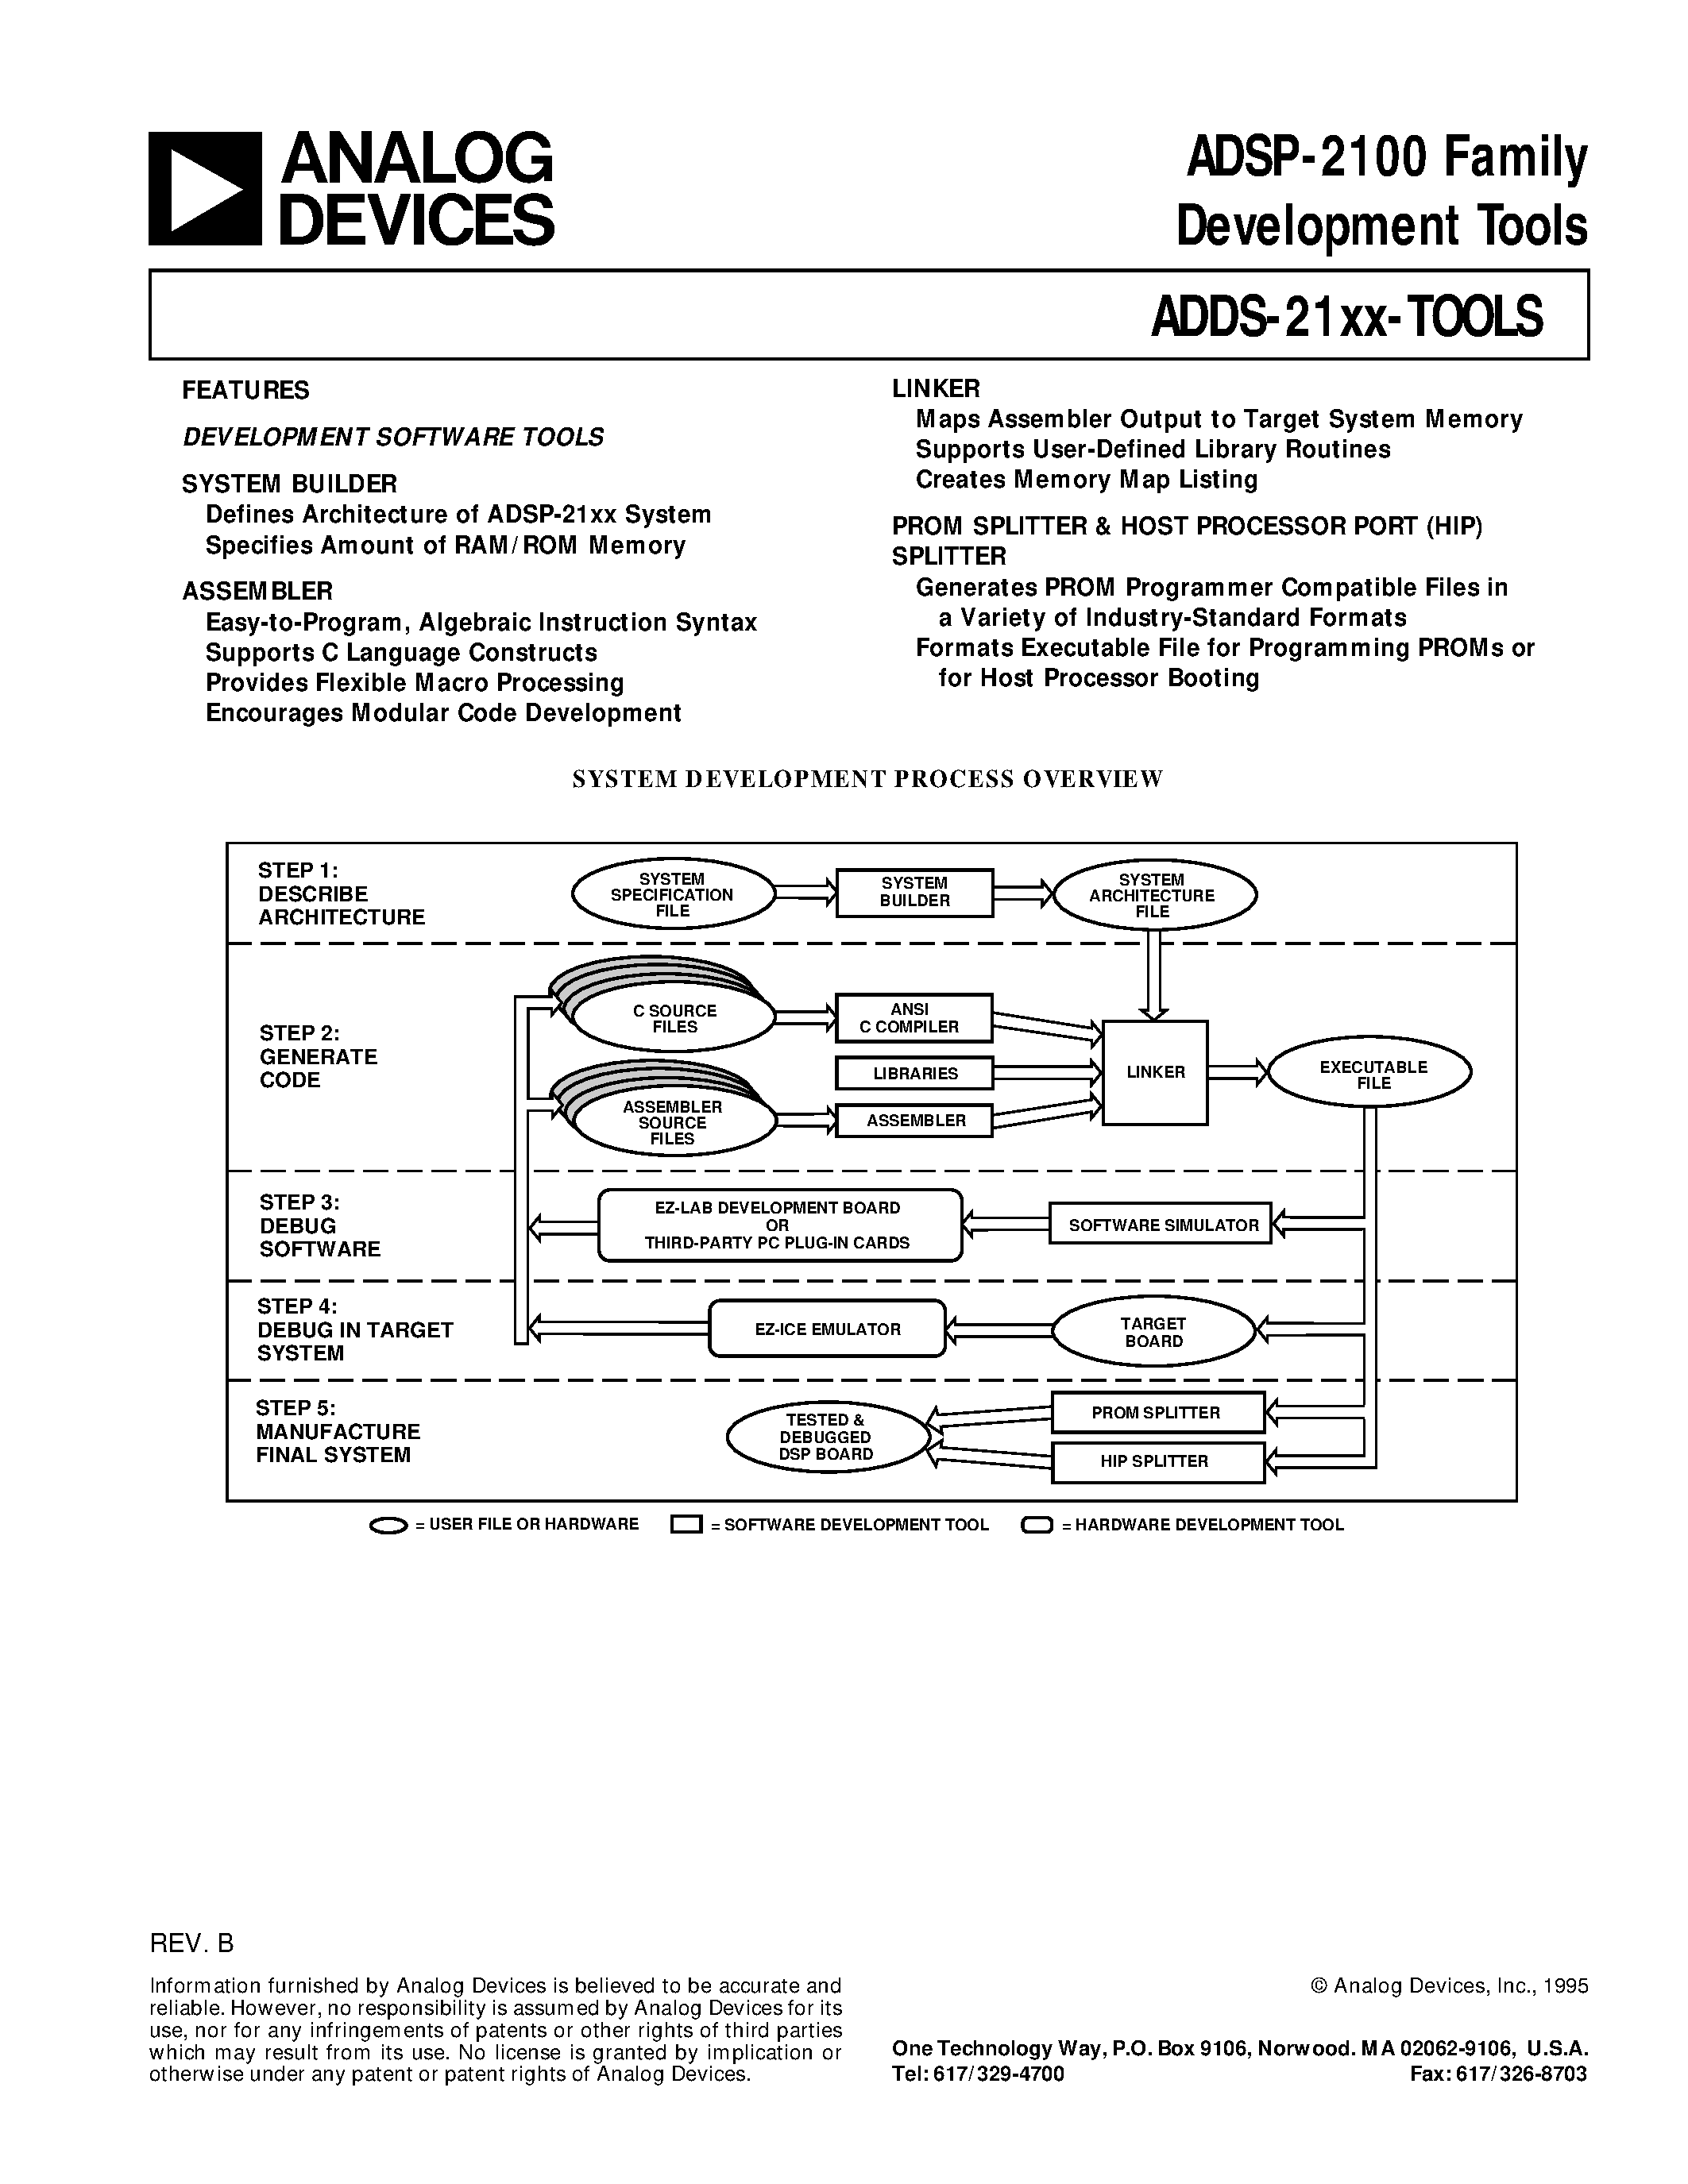 Datasheet ADDS-2171-EZ-LAB - ADSP-2100 Family Development Tools page 1